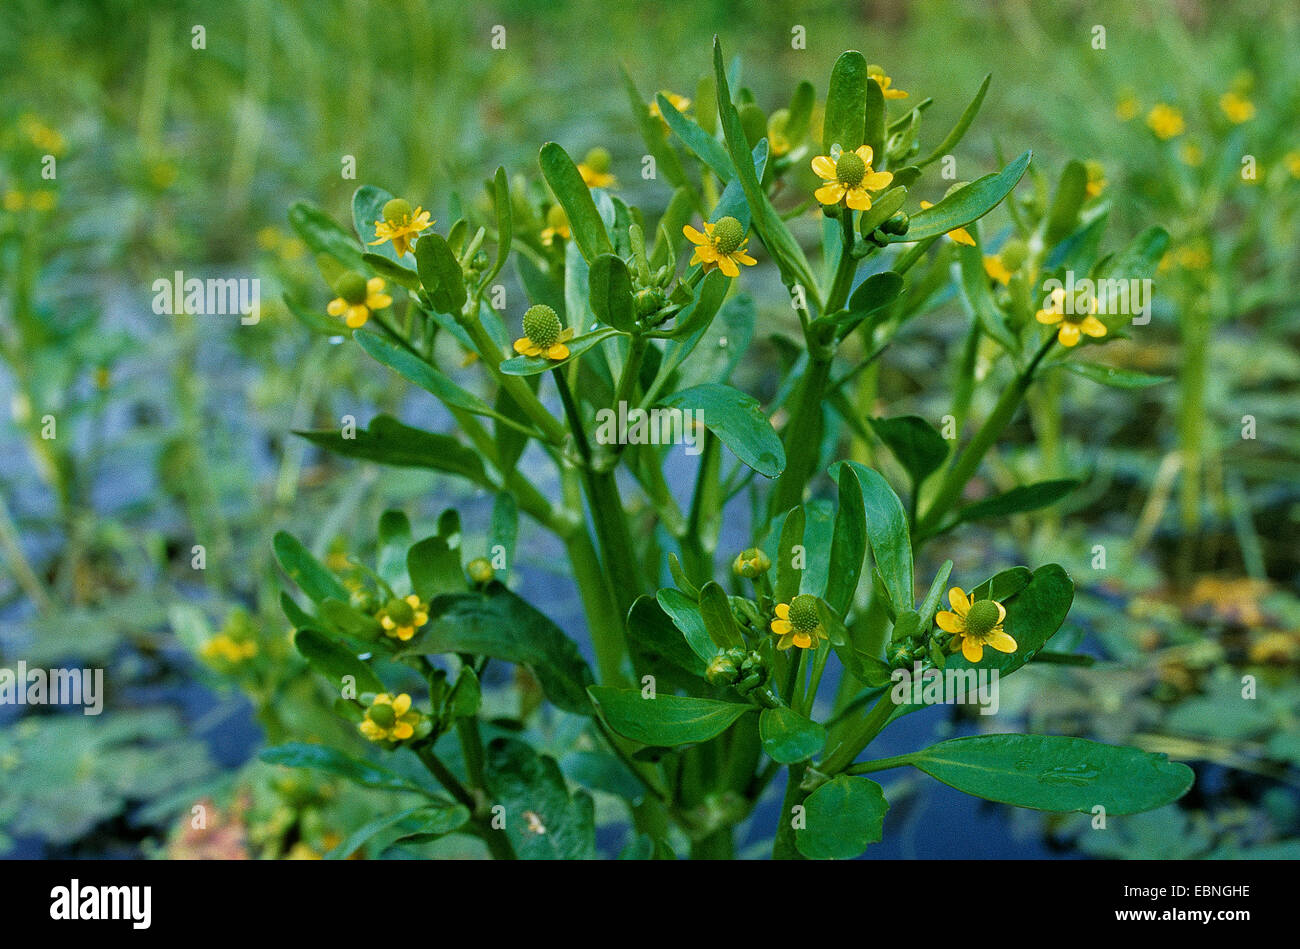 Blister buttercup, Celery-leaved buttercup, Celery-leaved crowfoot, Crowfoot buttercup (Ranunculus sceleratus), blooming, Germany Stock Photo